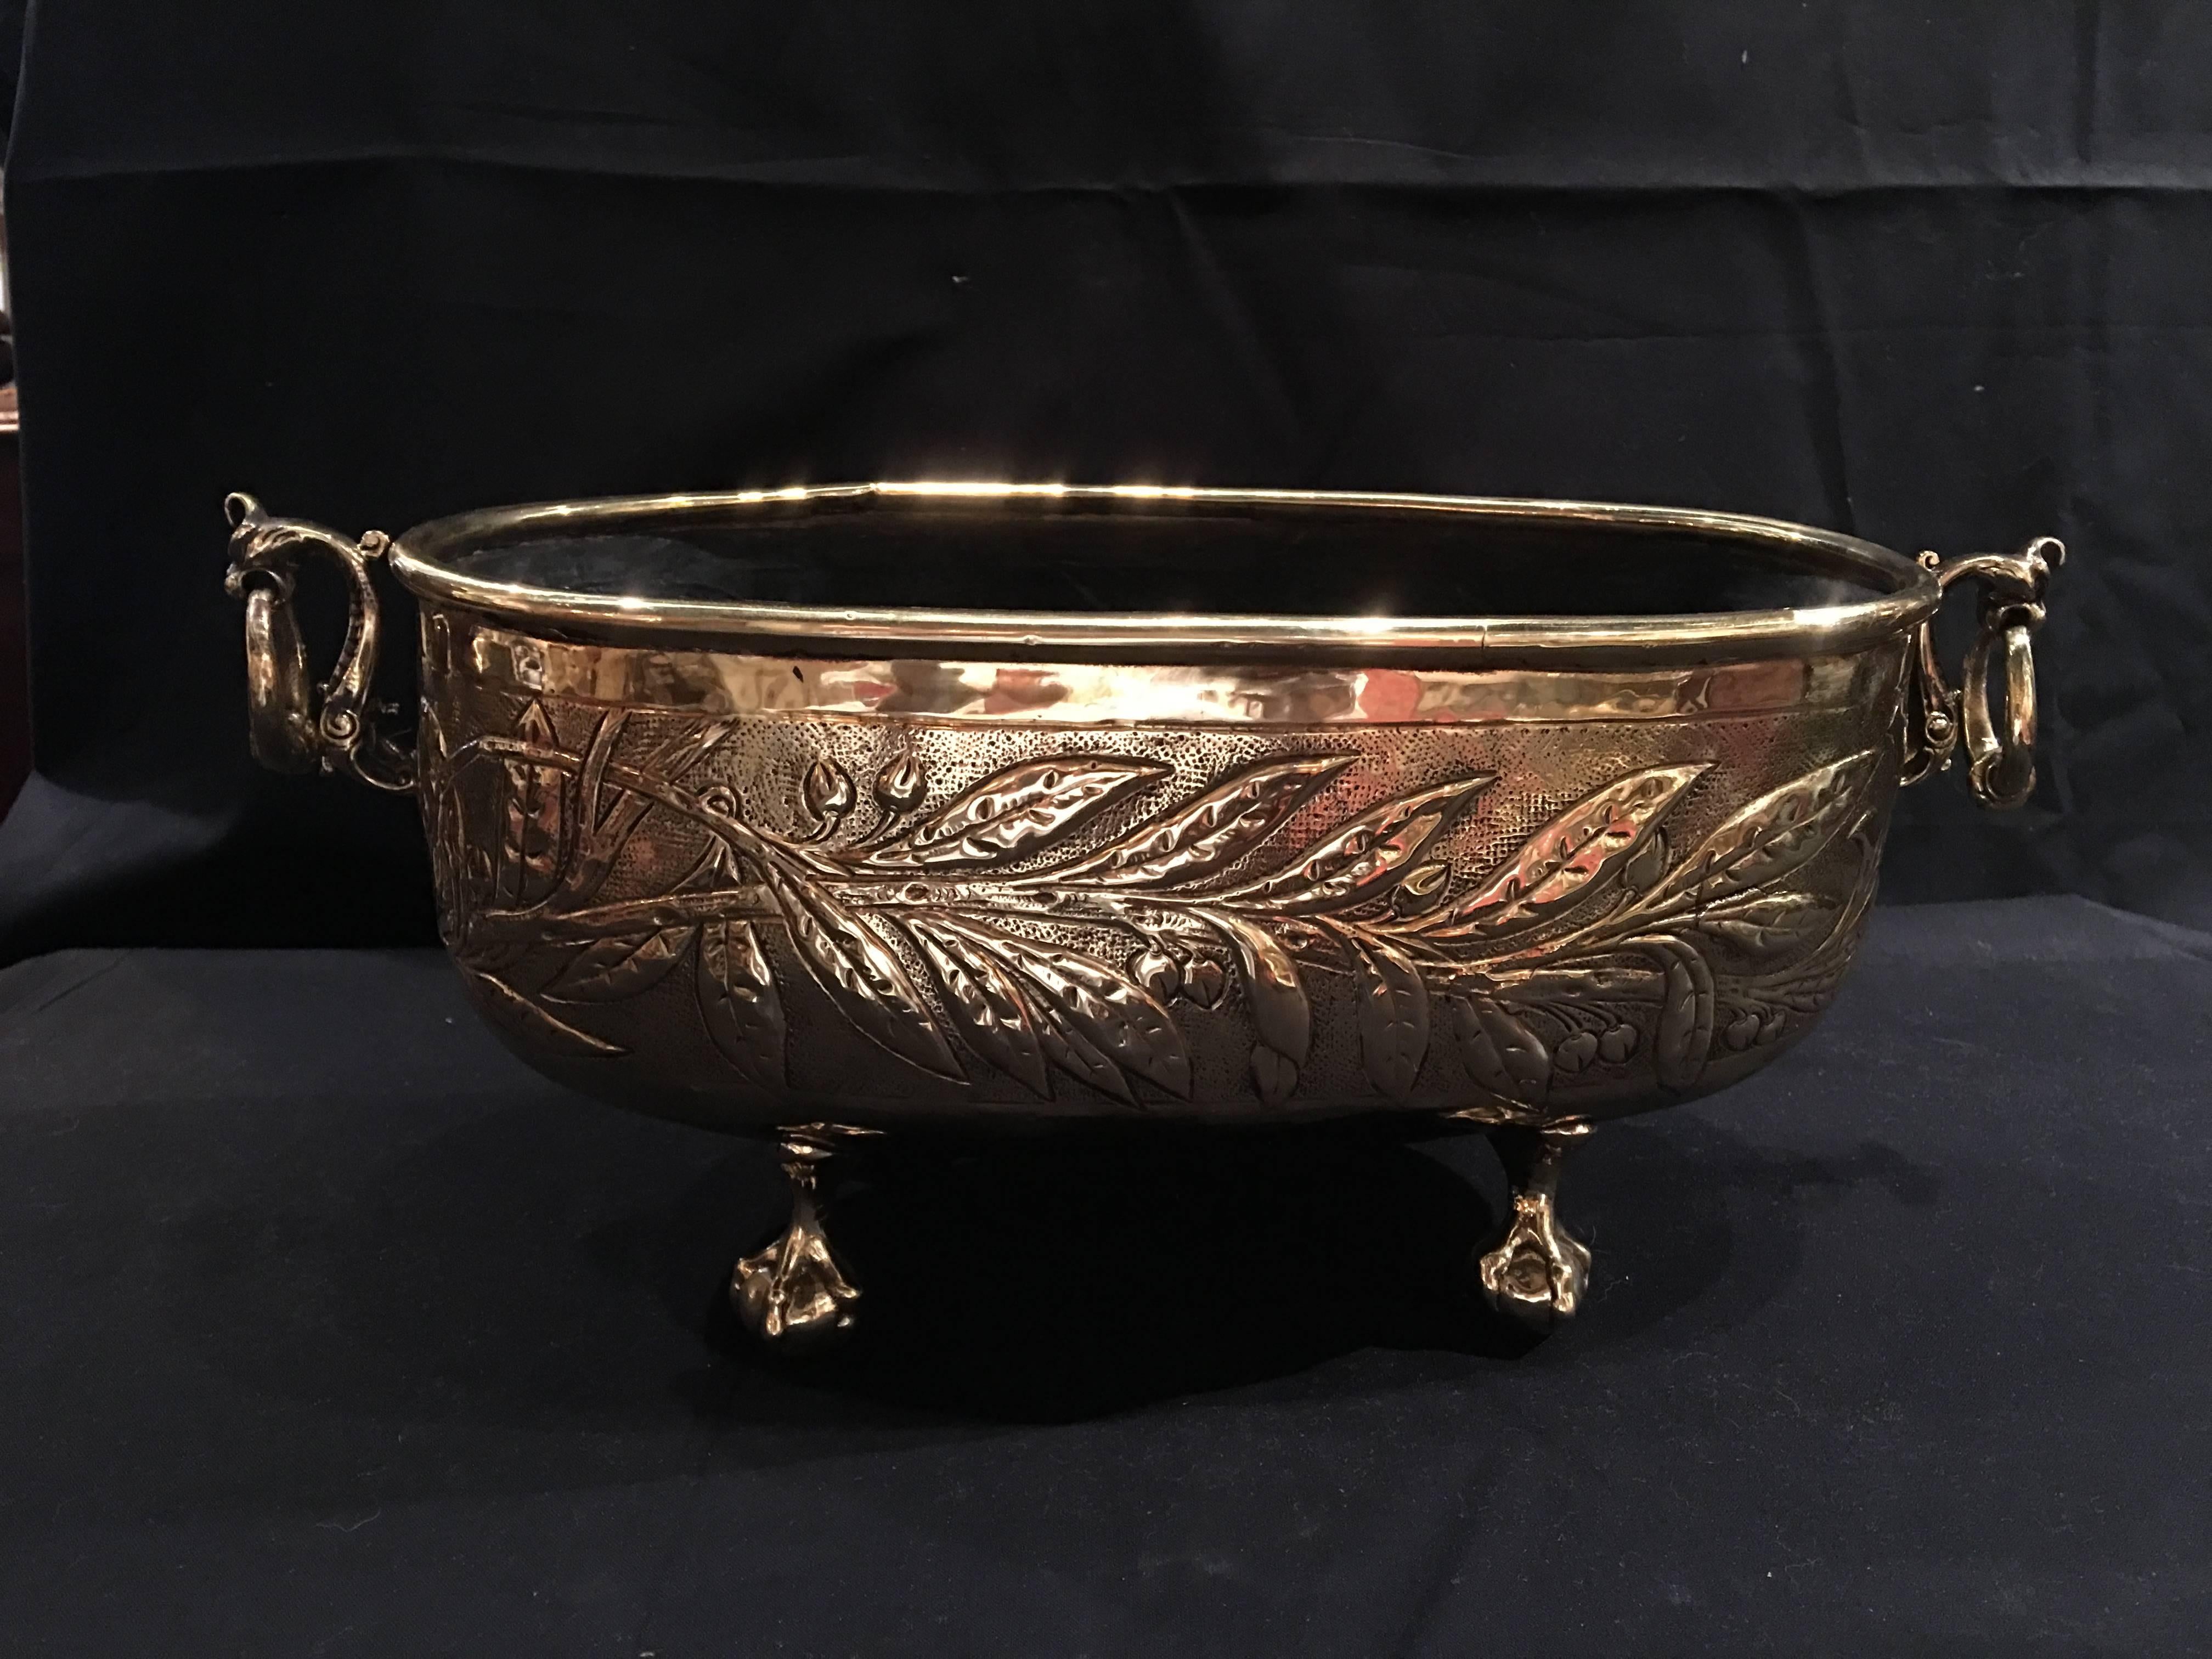 French polished brass oval jardinière or planter, 19th century. Ball and claw feet.